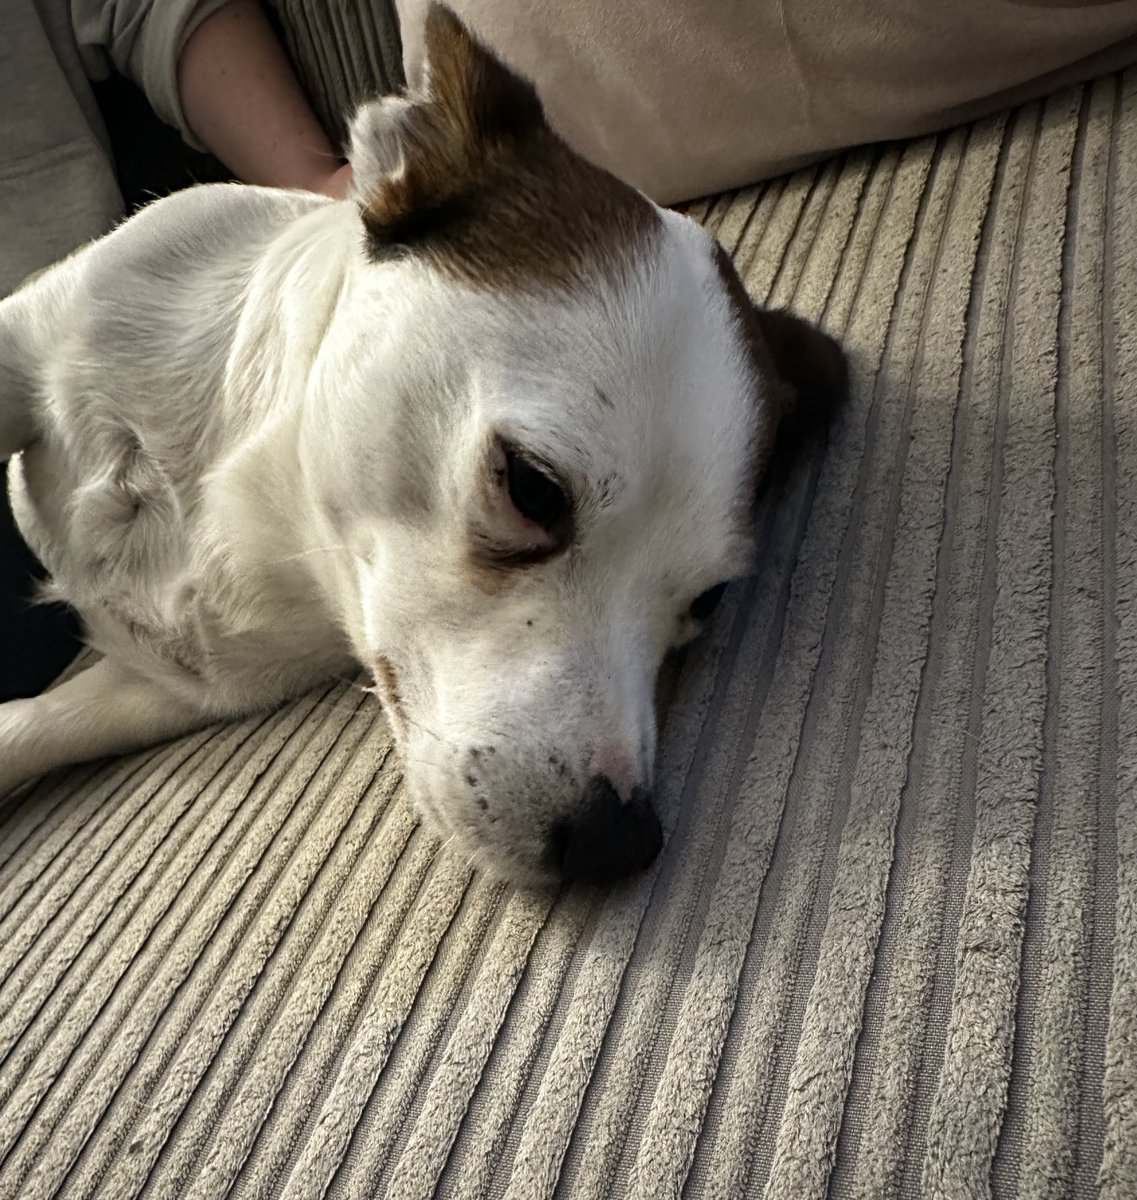 VERY URGENT please retweet to HELP FIND THE OWNER OF THIS STRAY DOG FOUND #WESTDRAYTON #HILLINGDON #LONDON Male Jack Russell Terrier, no chip, found 8 November. Now in a council pound, he could be missing or stolen from another region. Please share widely. DETAILS👇…